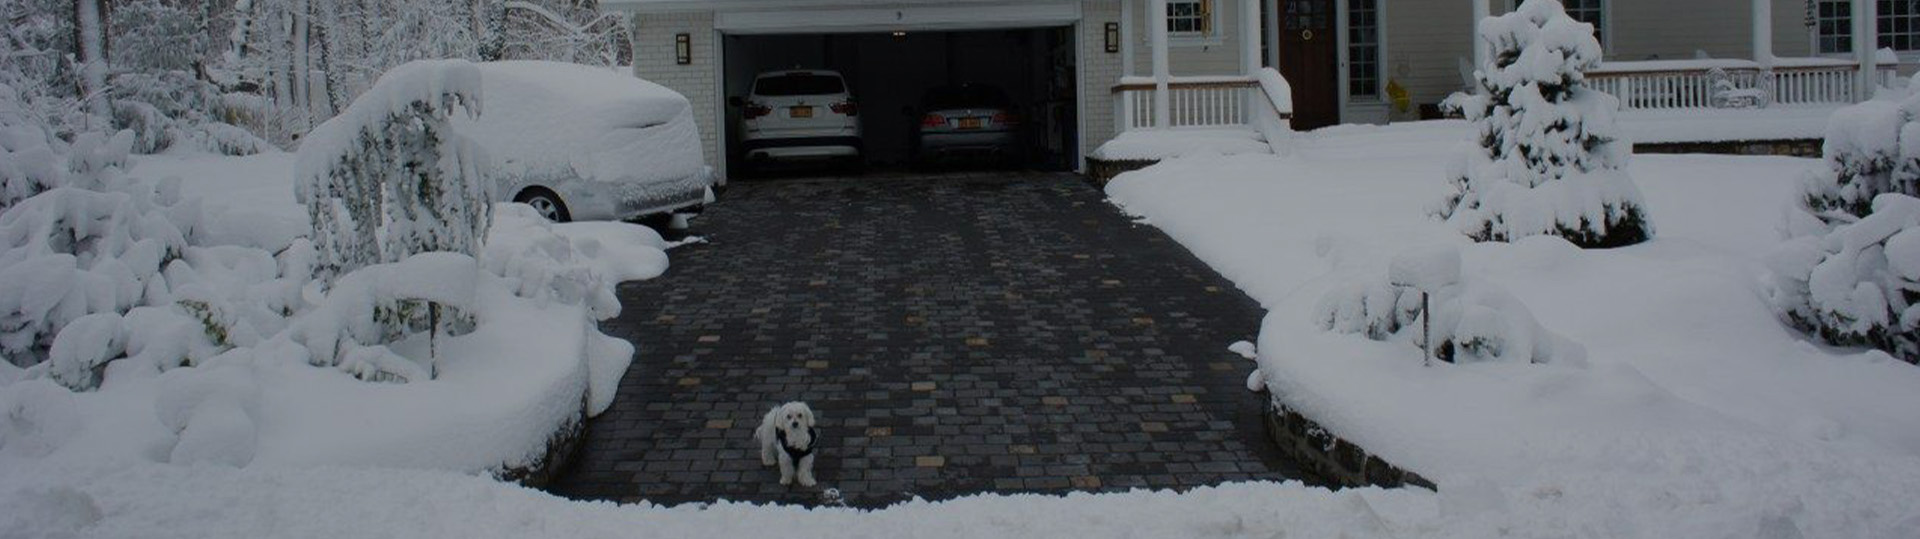 Des Moines area heated driveways and snow melting systems